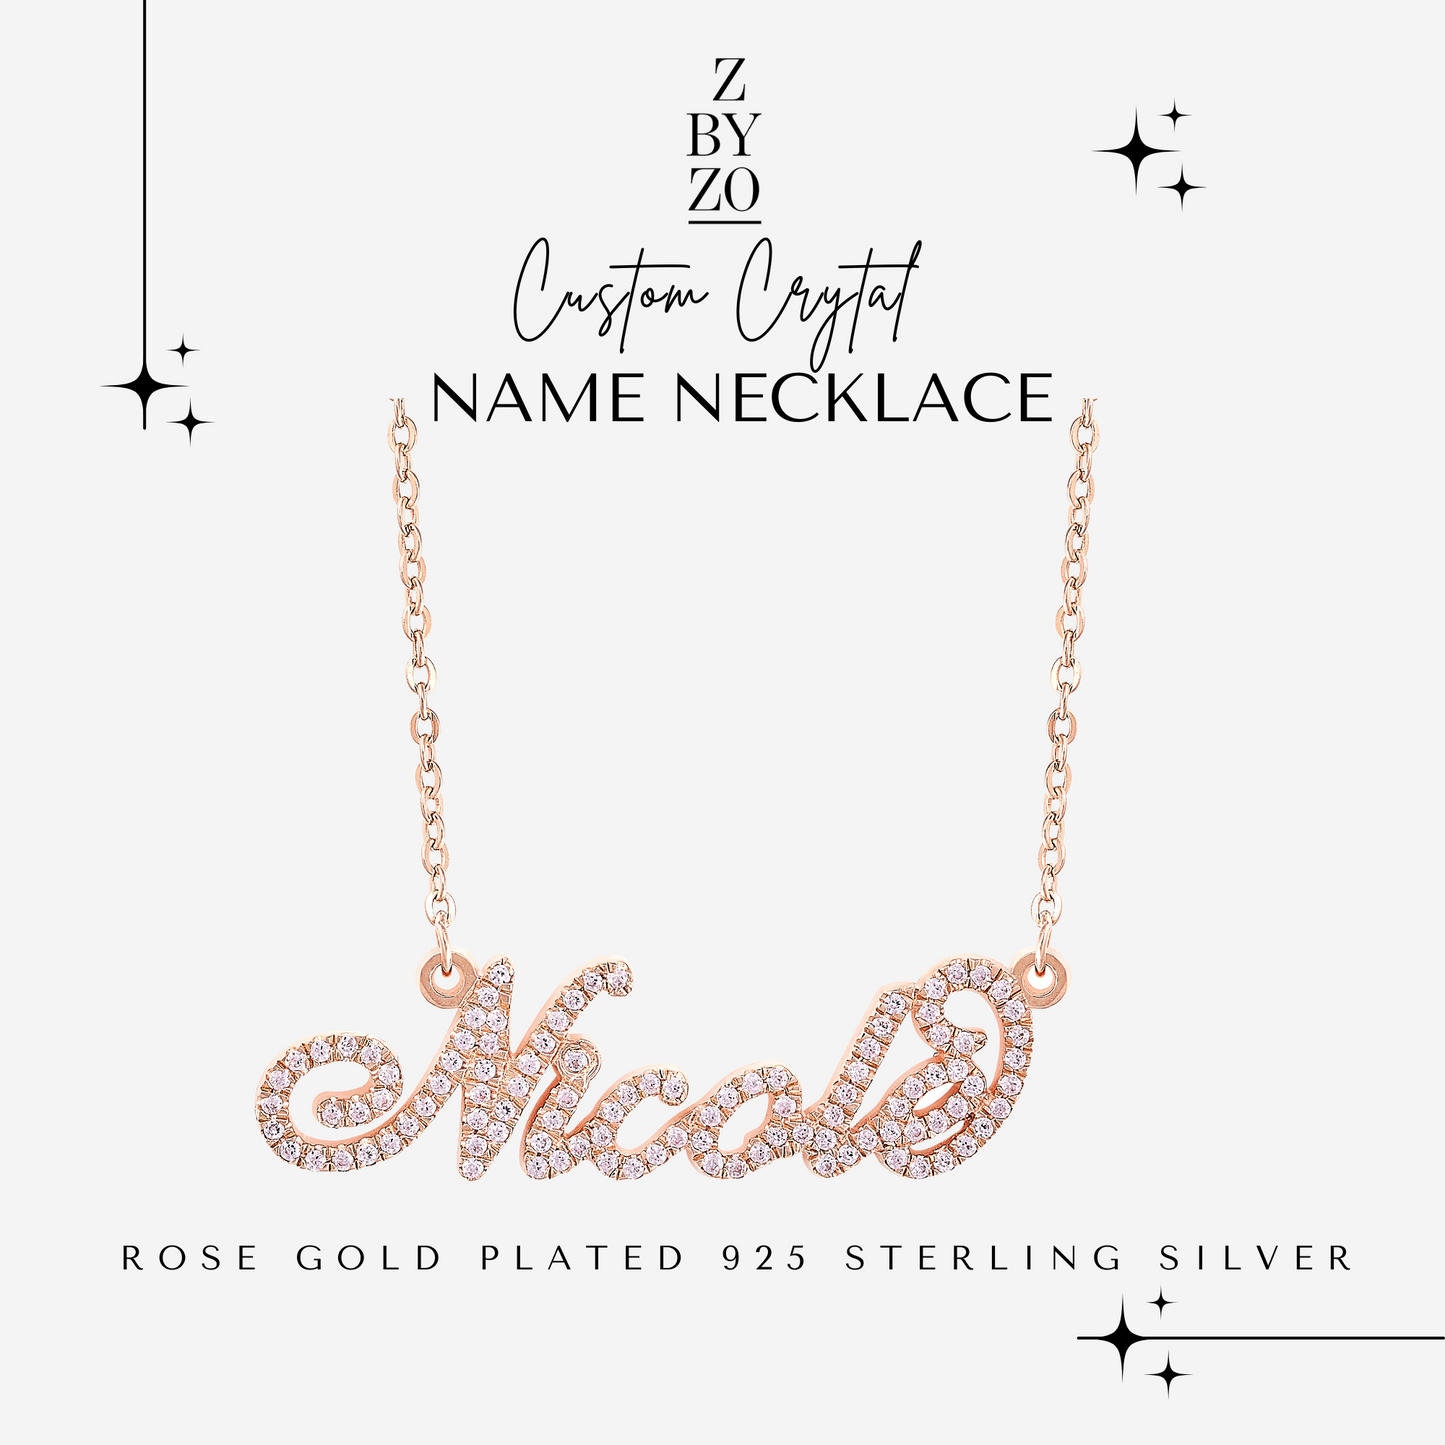 NEW* Rose Gold Plated on 925 Sterling Silver Custom Name Necklace with Pink Tourmaline Crystals